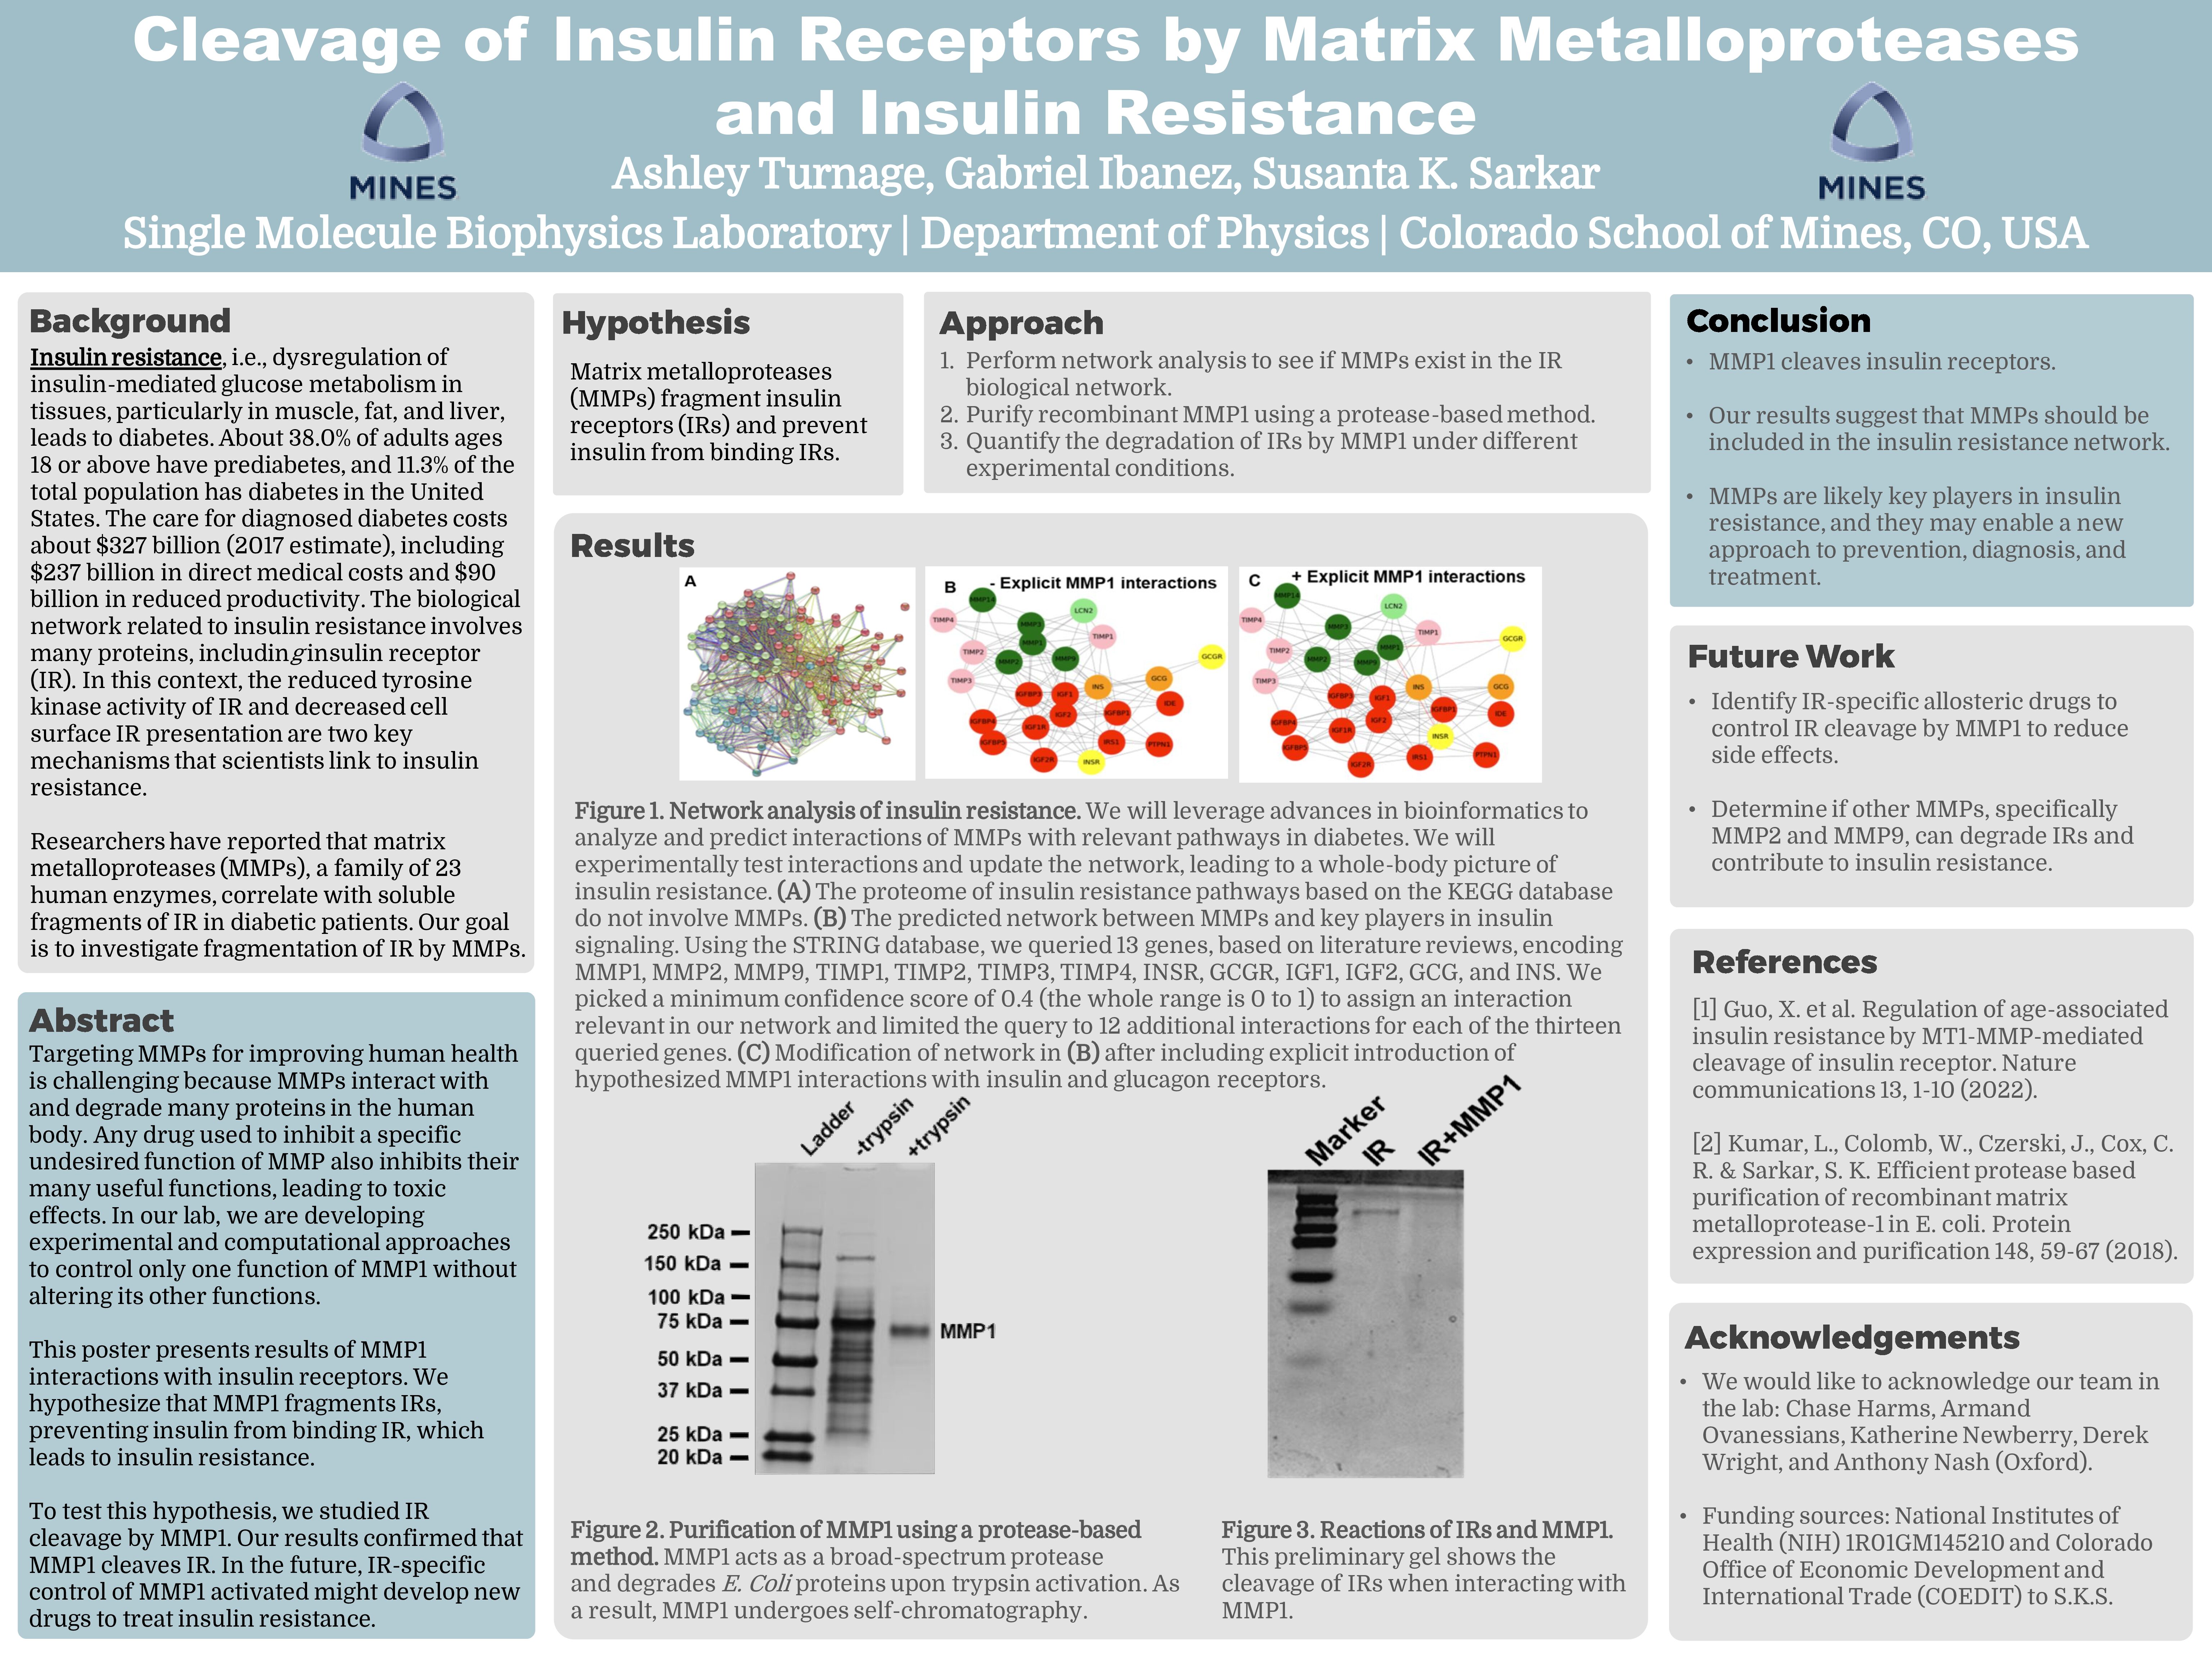 P122 Cleavage of Insulin Receptors by Matrix Metalloproteases and Insulin Resistance